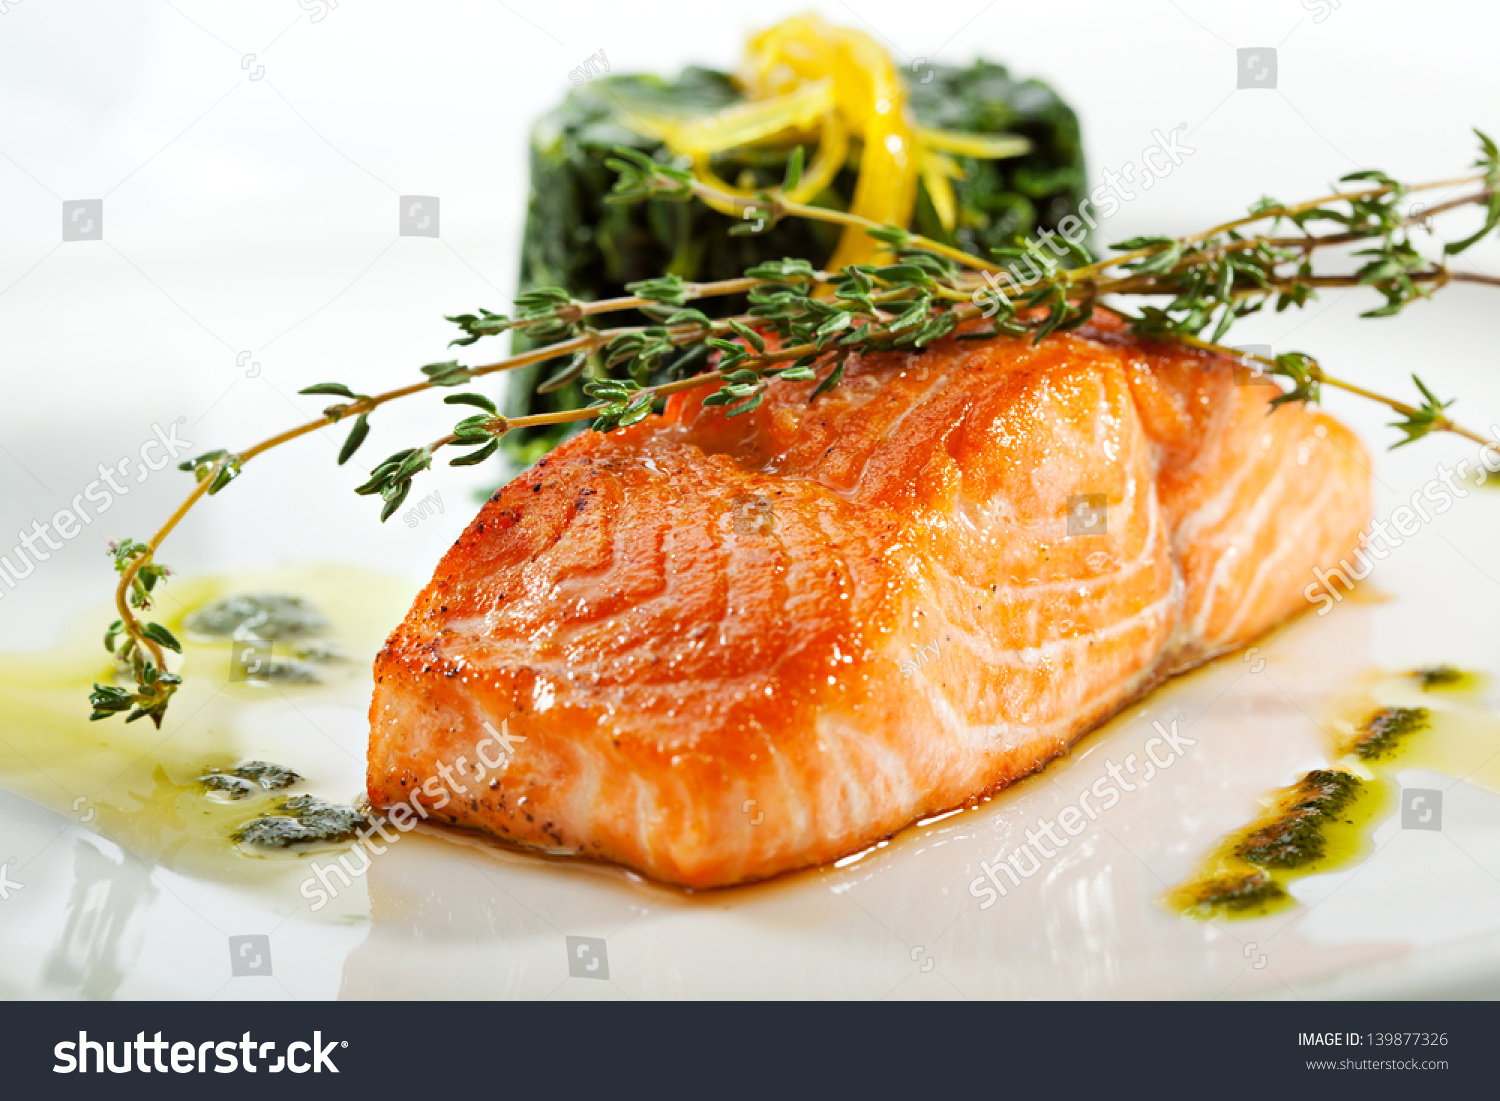 Baked Salmon Steak with Spinach and Lemon Slice #139877326